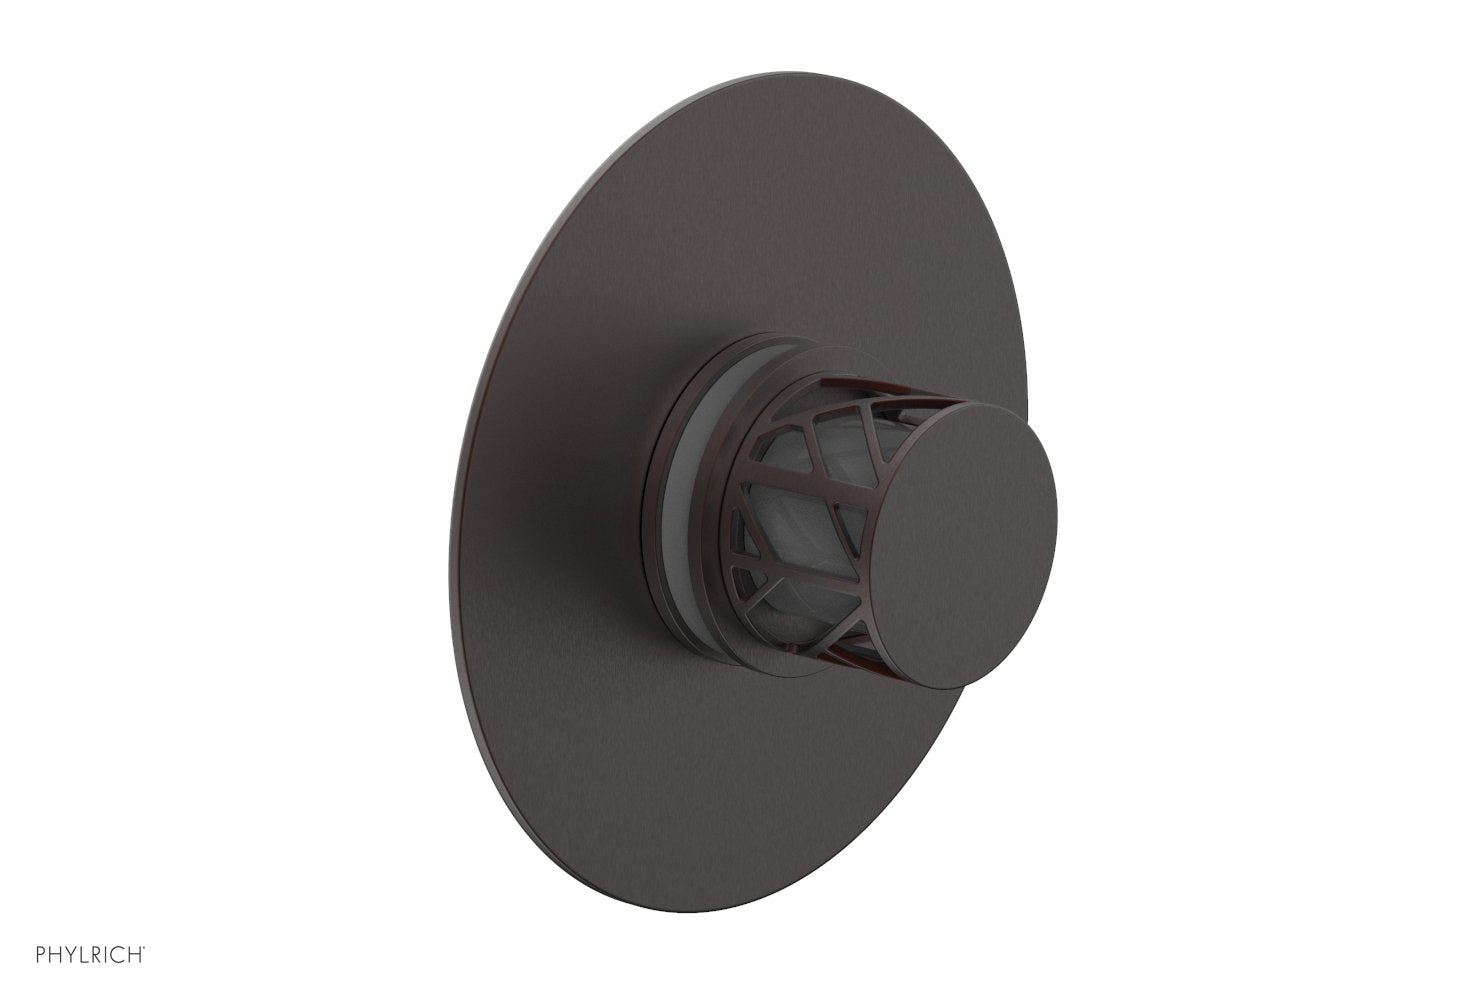 Phylrich JOLIE Pressure Balance Shower Plate & Handle Trim, Round Handle with "Grey" Accents